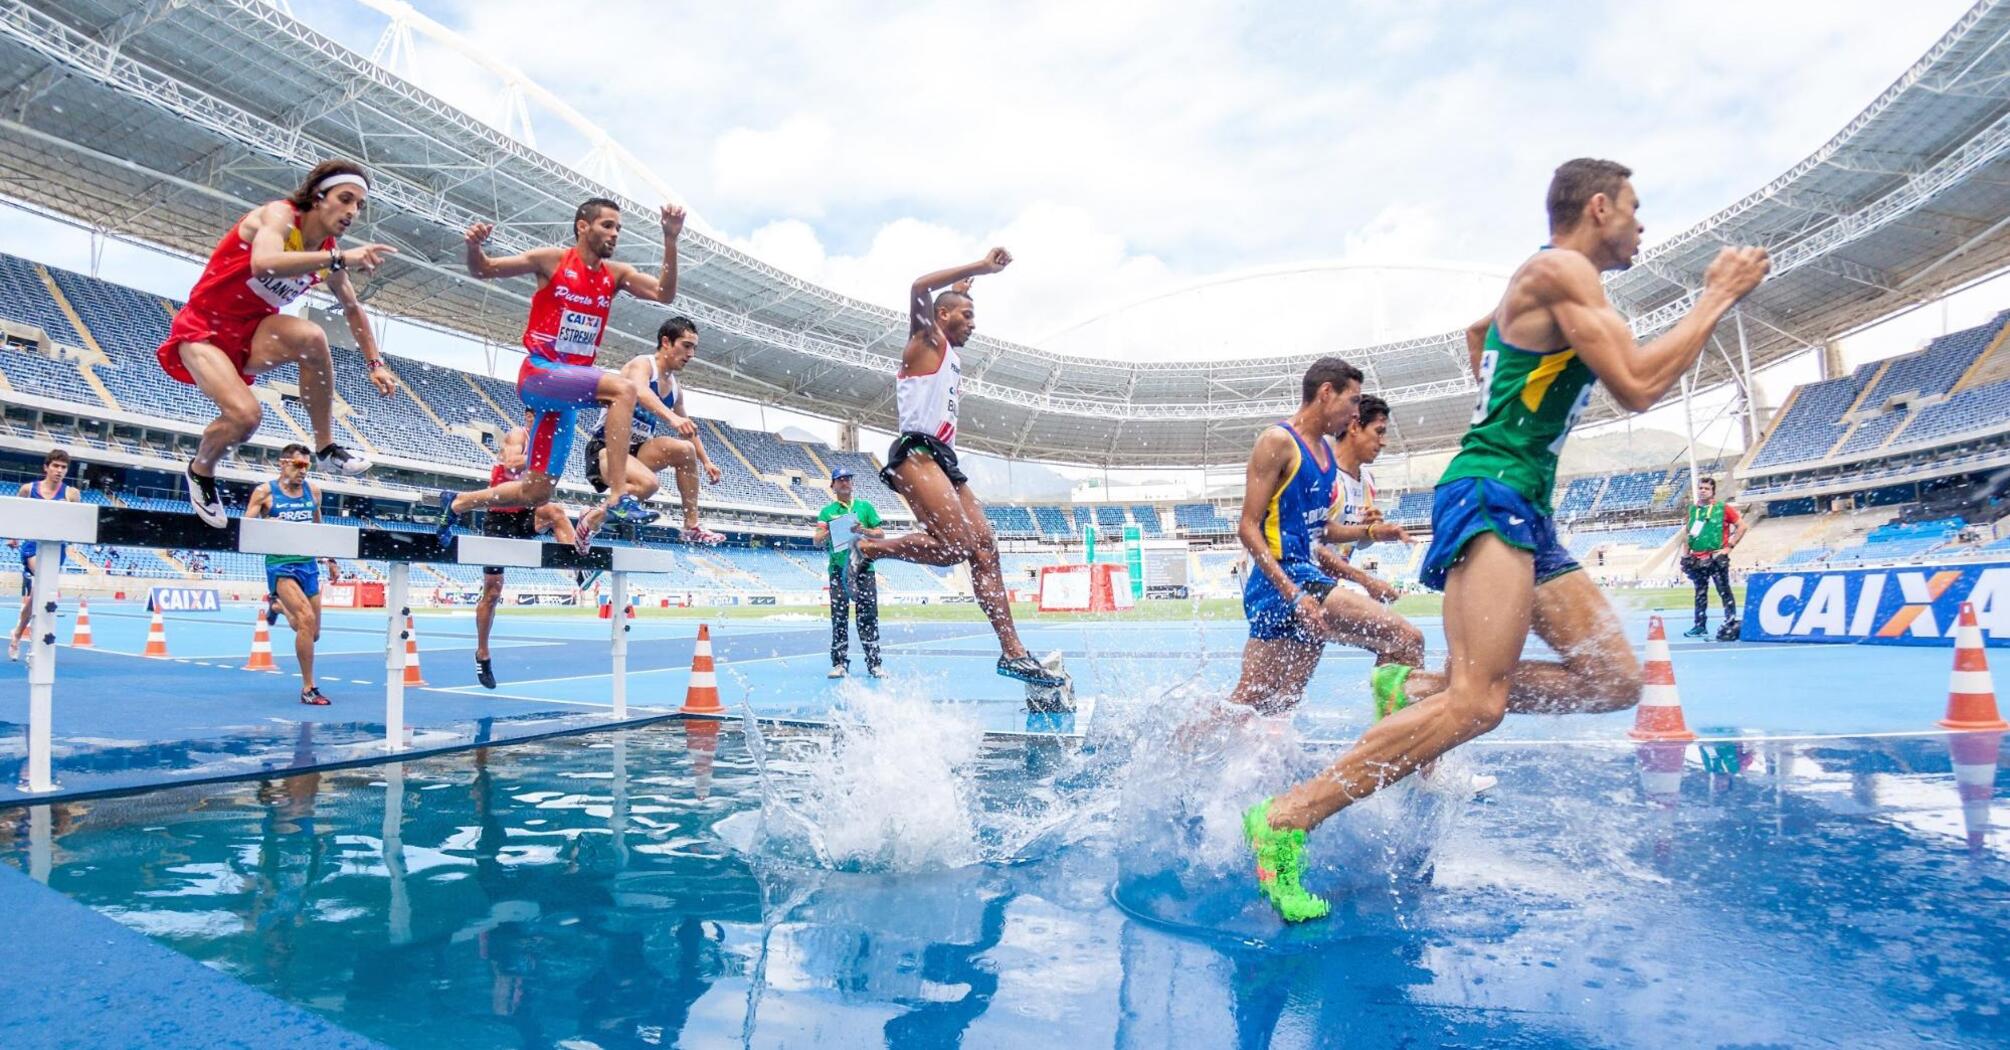 A group of runners overcoming a water obstacle during a steeplechase competition at the stadium